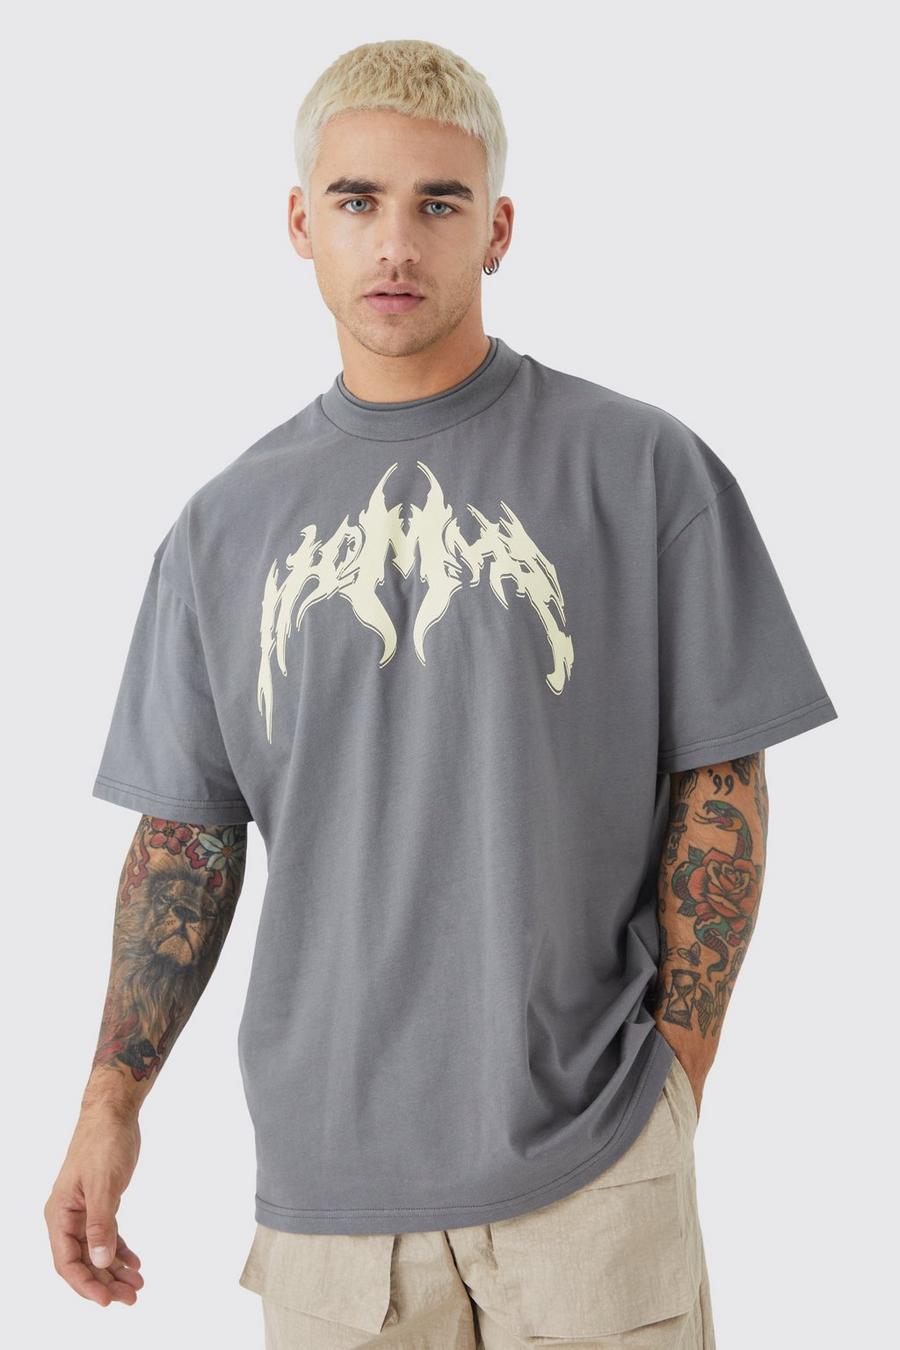 Charcoal grey Oversized Double Neck  Heavy Printed T-shirt